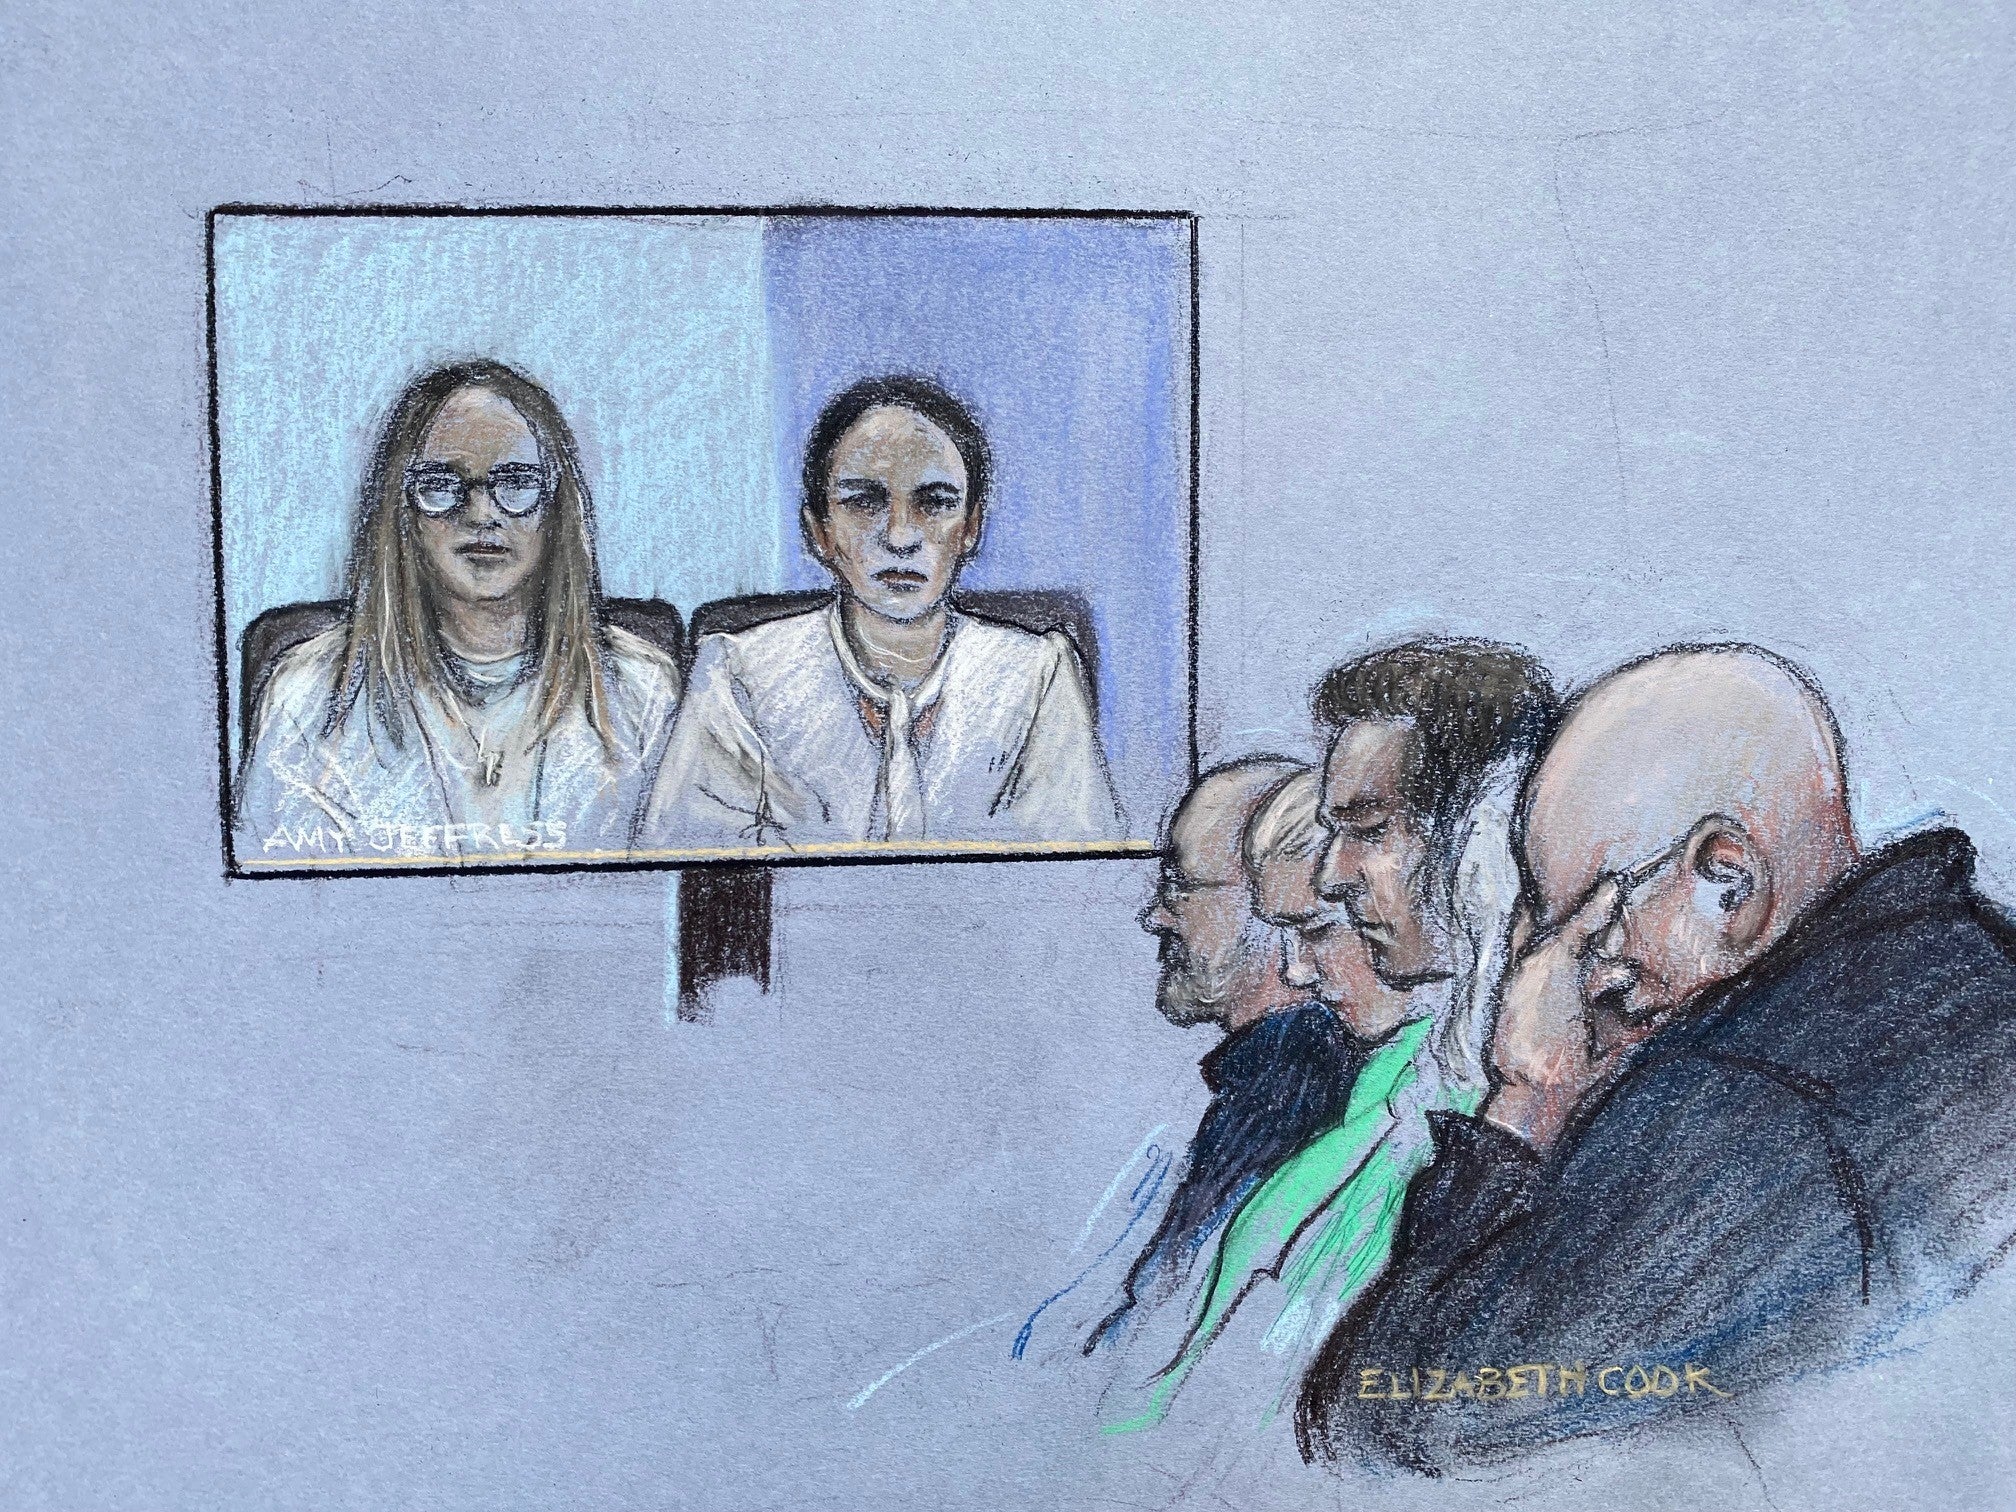 US citizen Anne Sacoolas (on screen right), making an appearance at the Old Bailey in London, via video-link from the United States